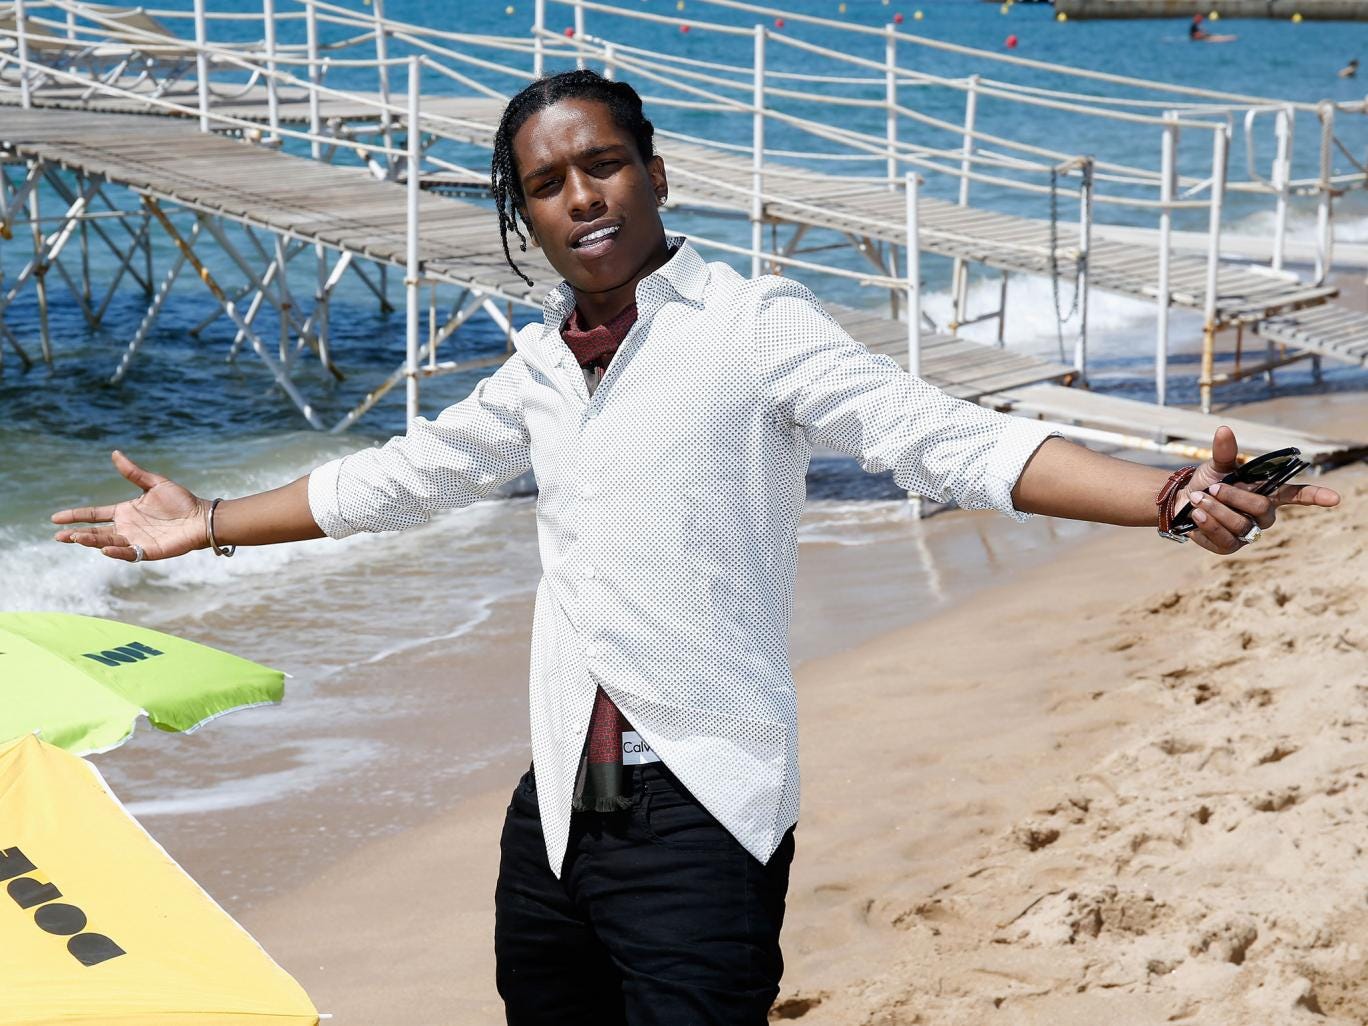 ASAP Rocky gives nauseating response to exp